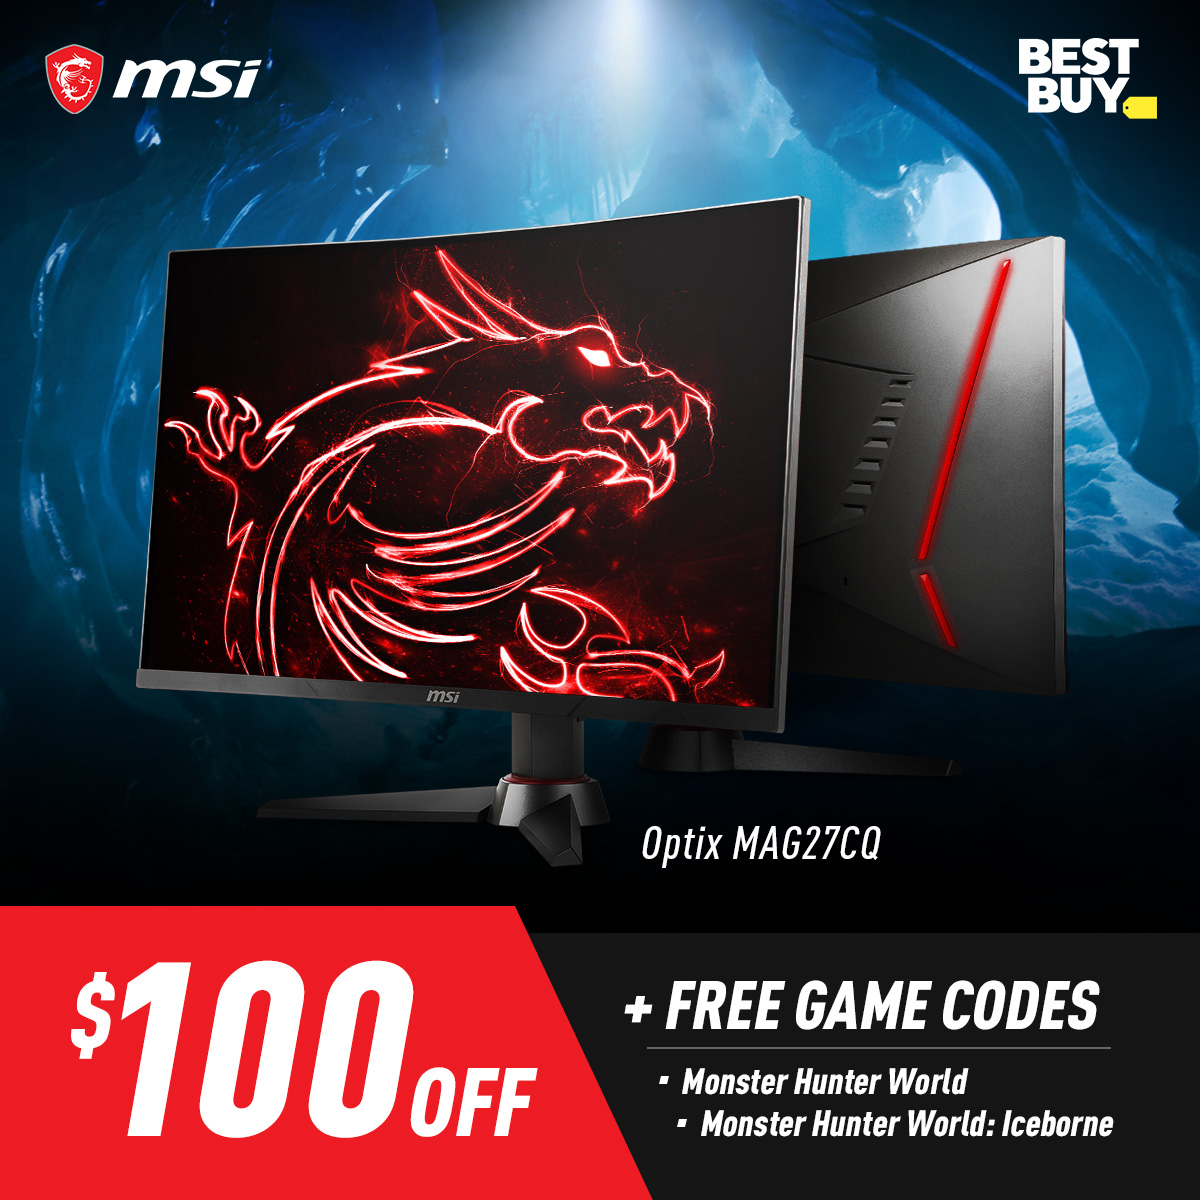 Msi Gaming Usa Time To Upgrade From 1080p To 1440p 144hz Gaming Pick Up Our 27 Mag27cq Qhd 144hz Curved Monitor For 100 Off And Monster Hunter World Iceborne For